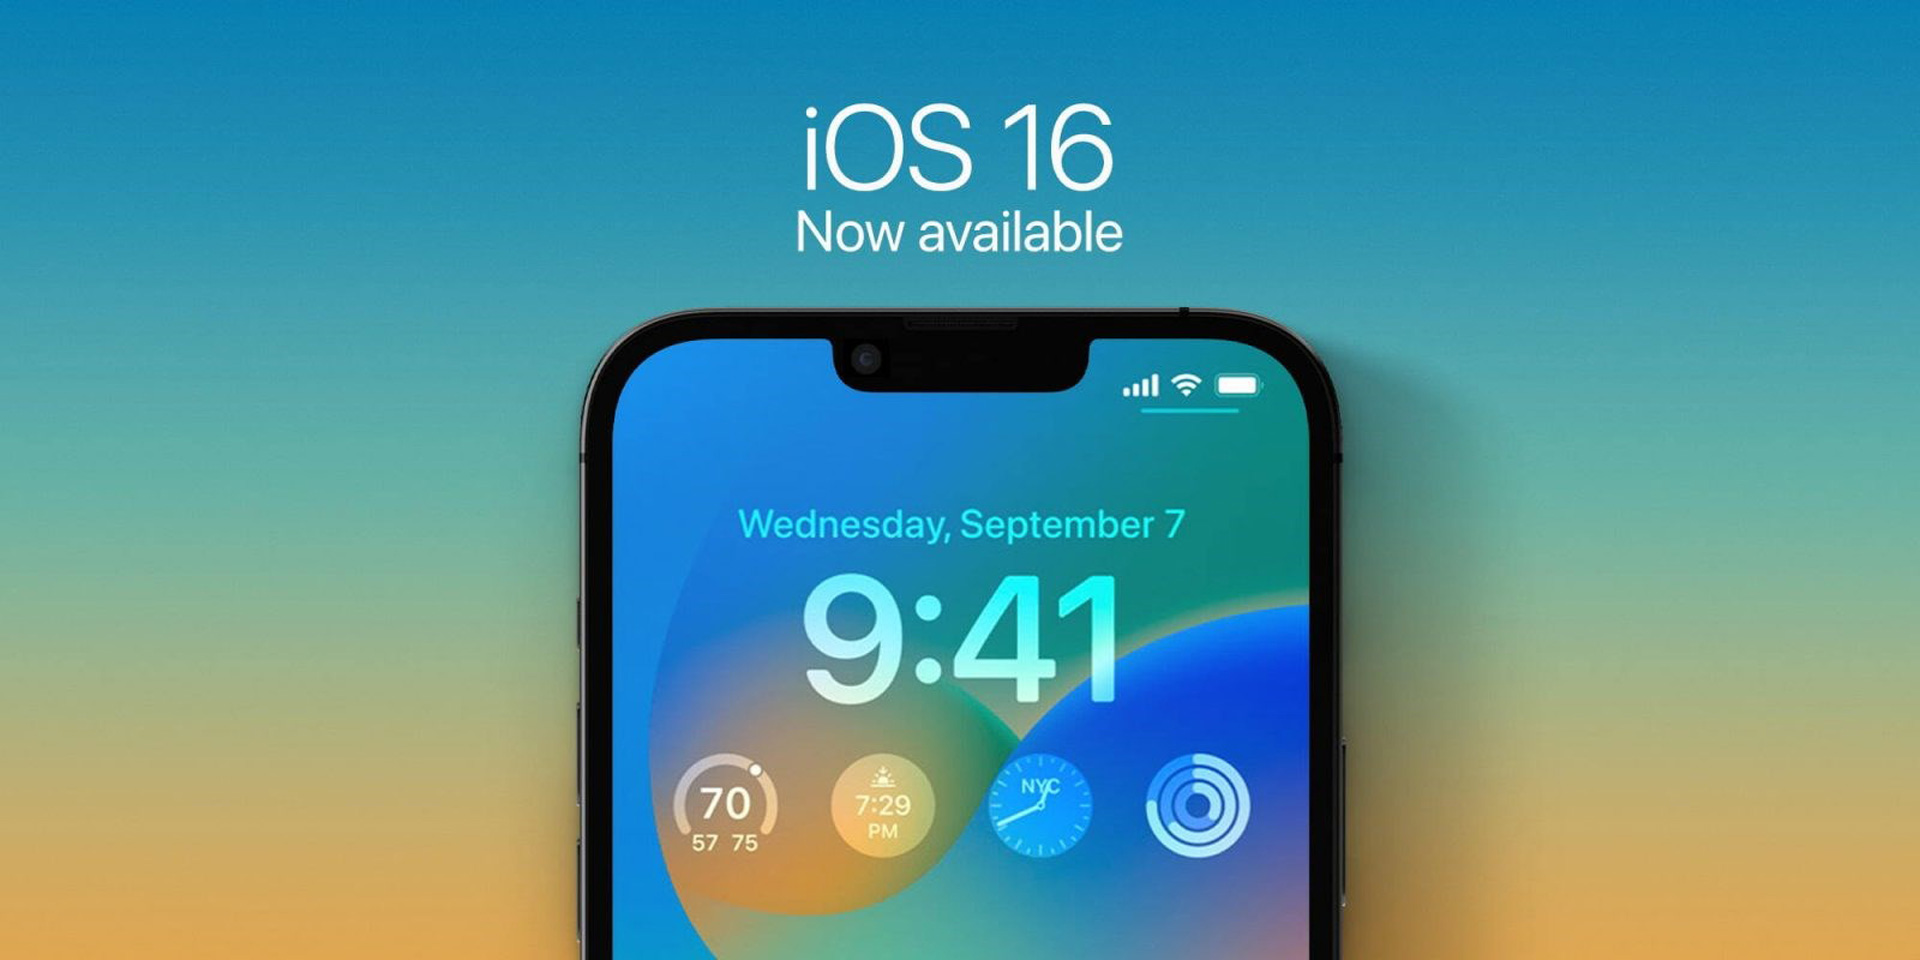 App Store Face ID not working in iOS 16: How to fix it?